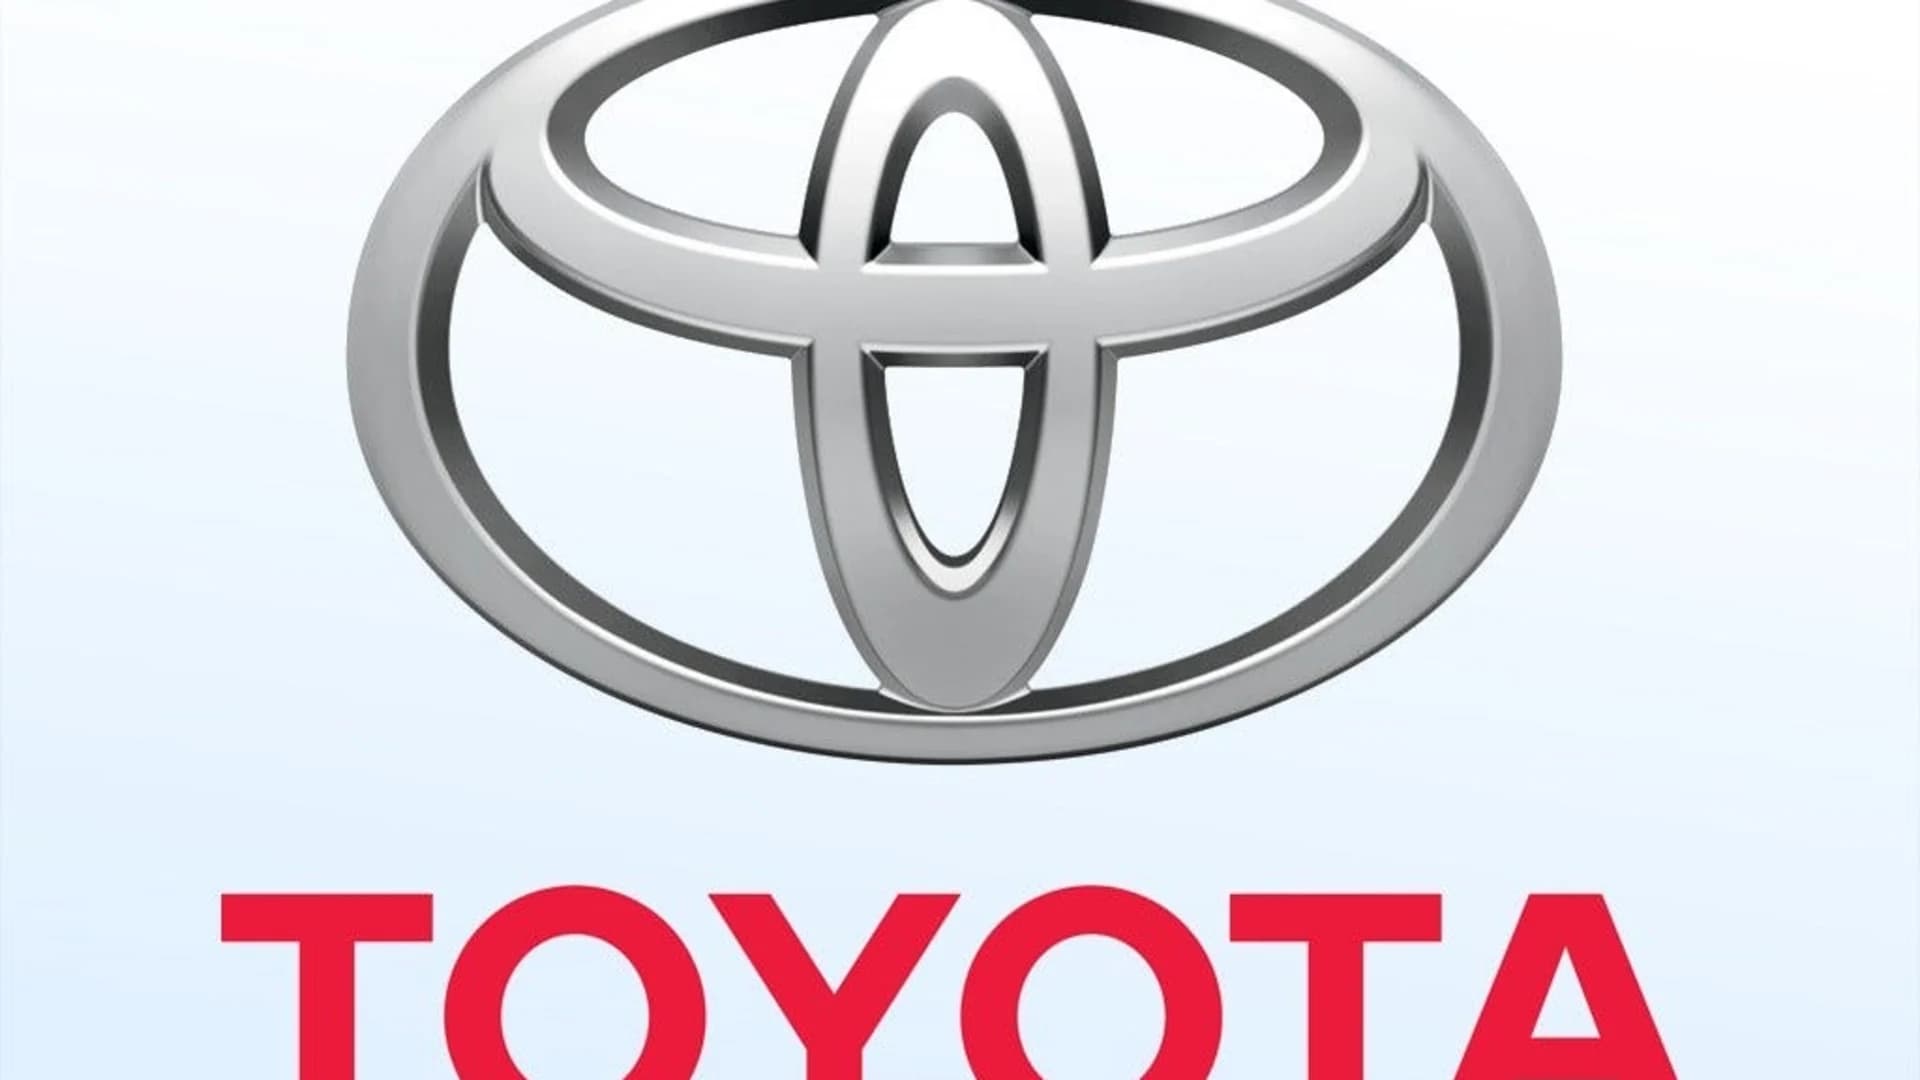 Toyota recalls over 1M vehicles due to air bag problems